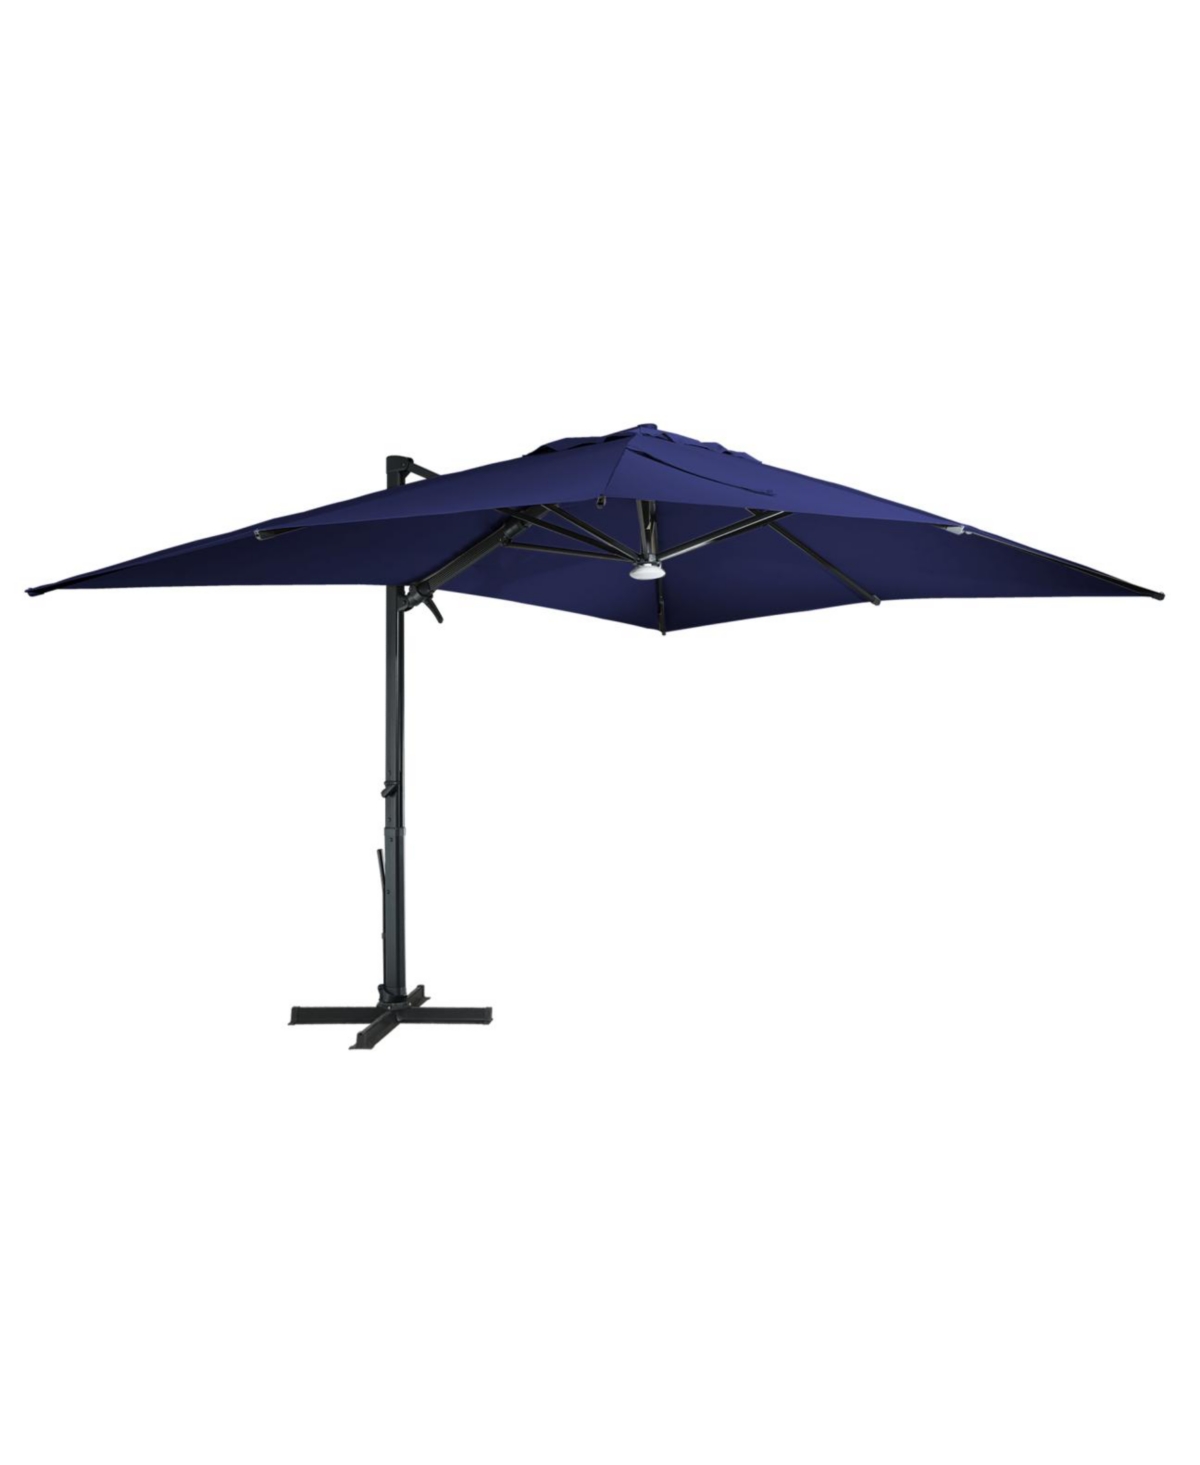 13ft Square Solar Led Cantilever Patio Umbrella with Bluetooth Light for Outdoor Shade - Gray